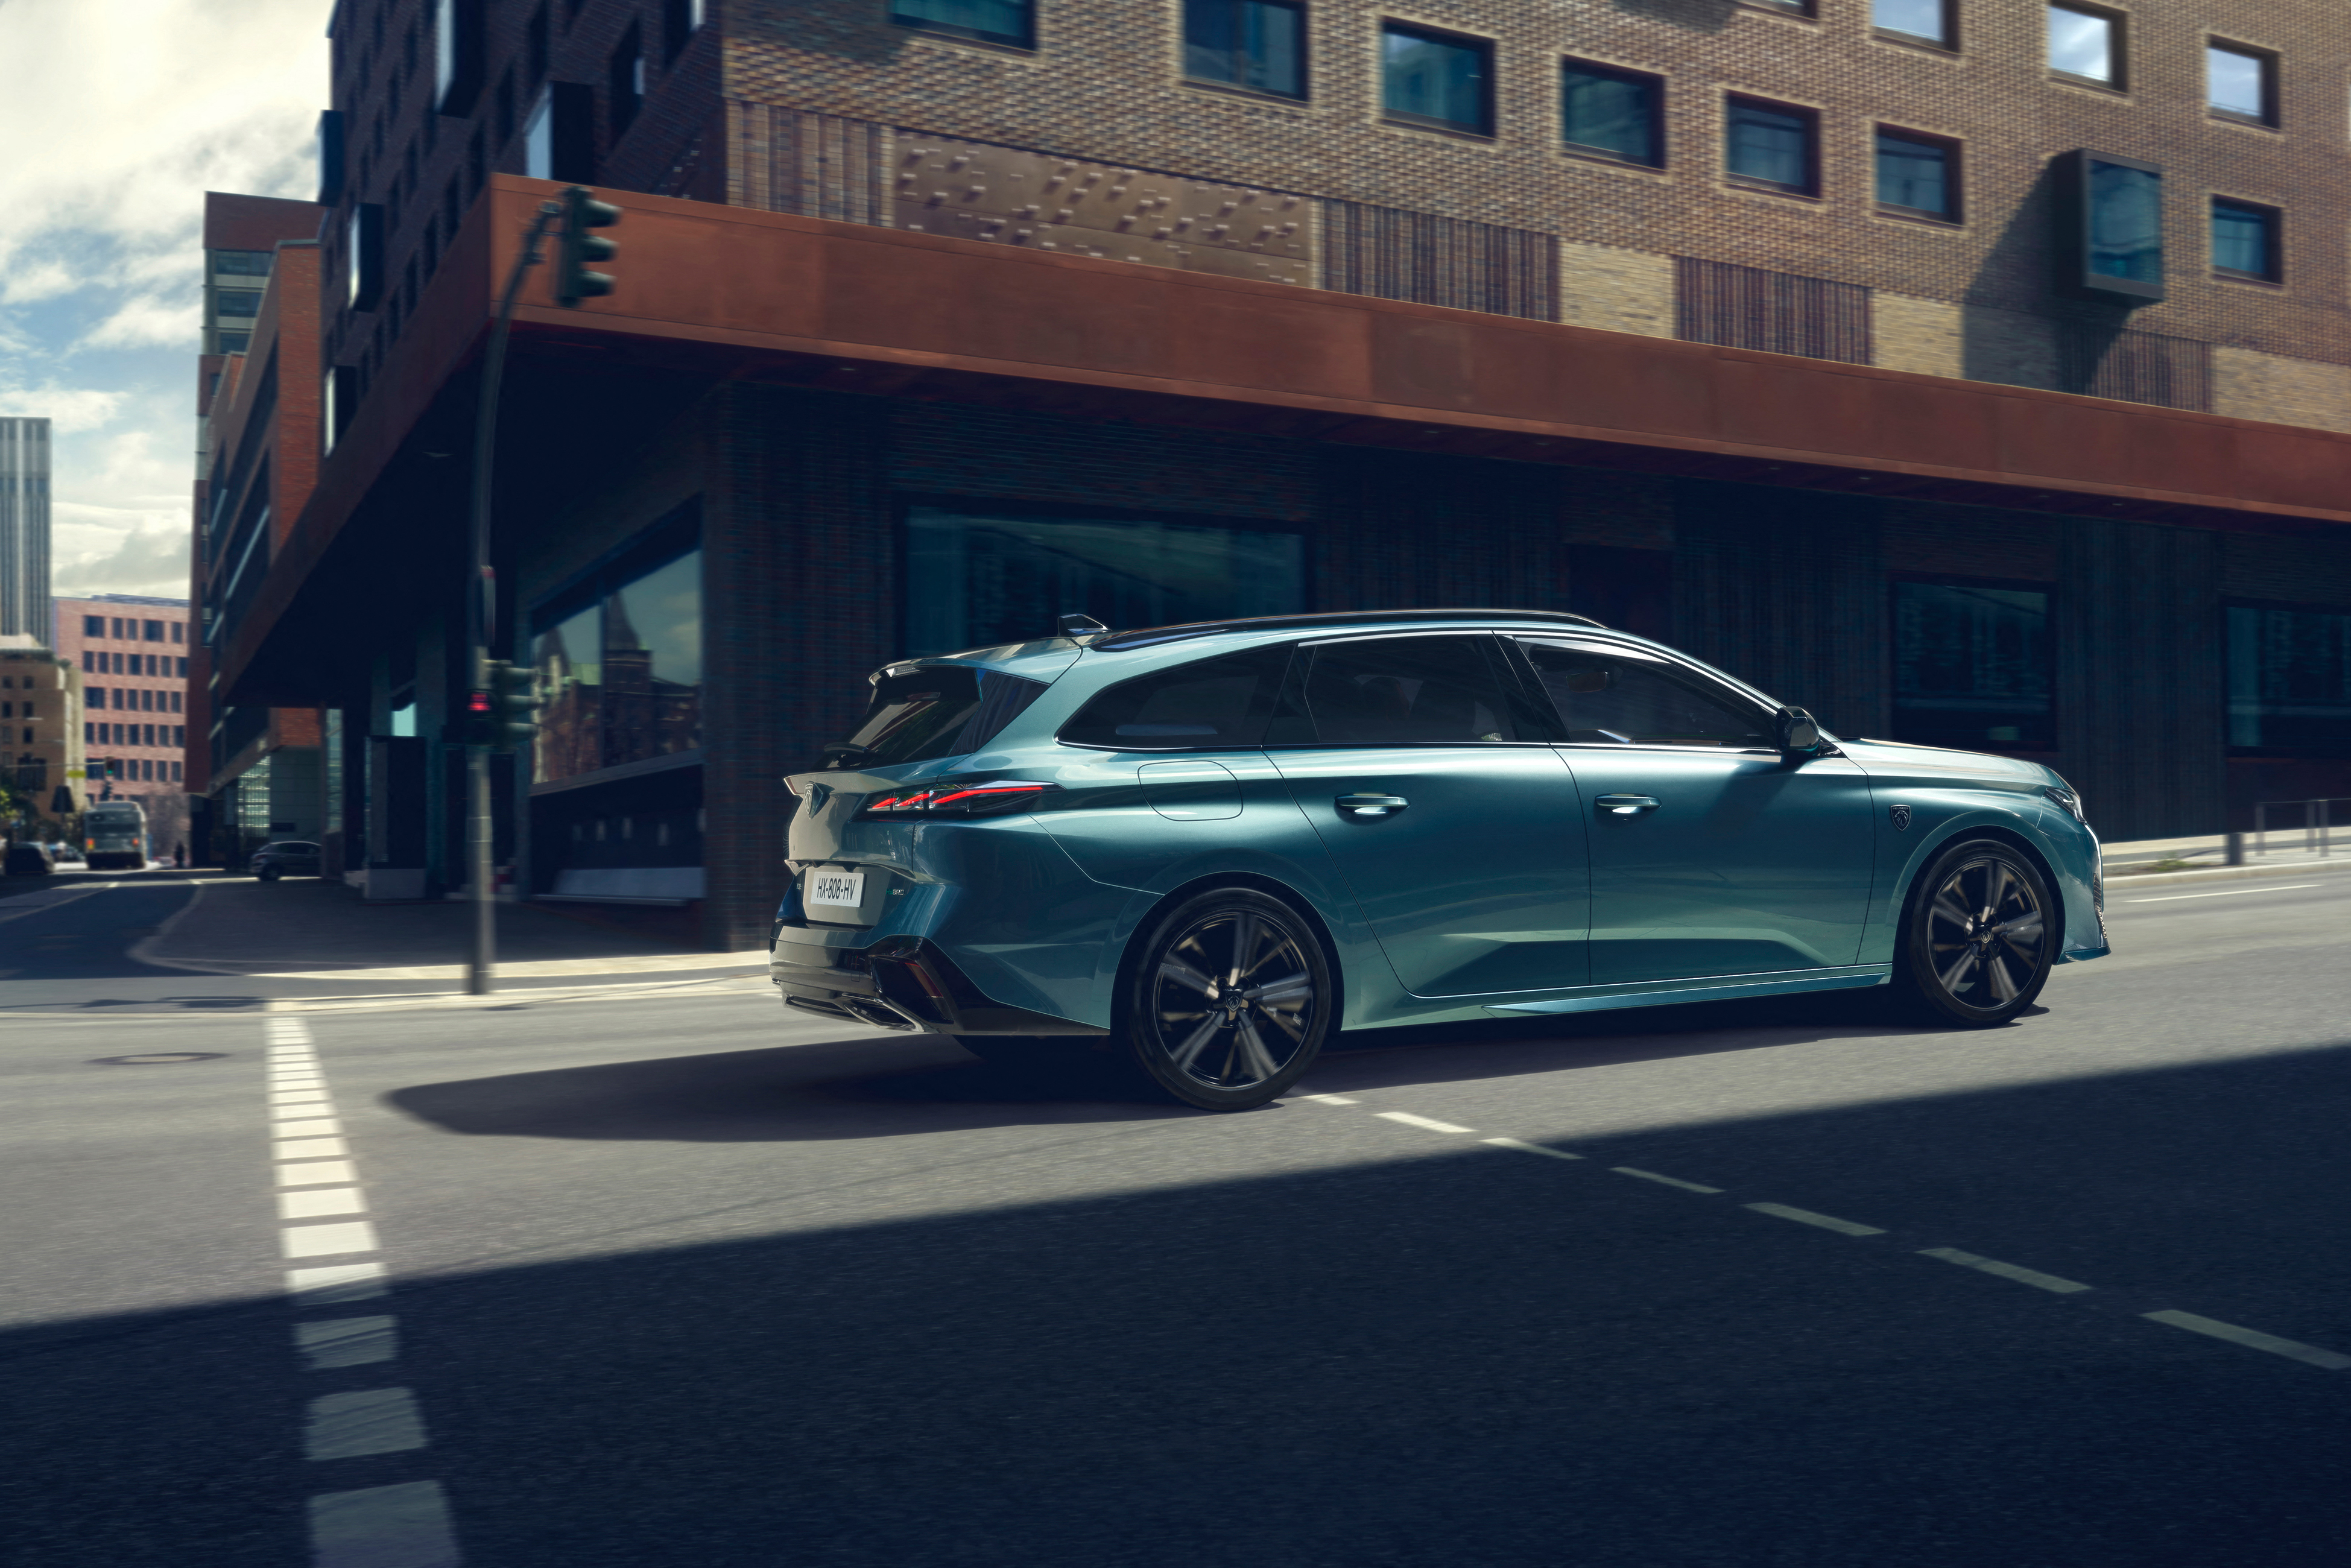 The new PEUGEOT 308, Women's World Car of the Year 2022 in the Urban  Vehicle category, Peugeot